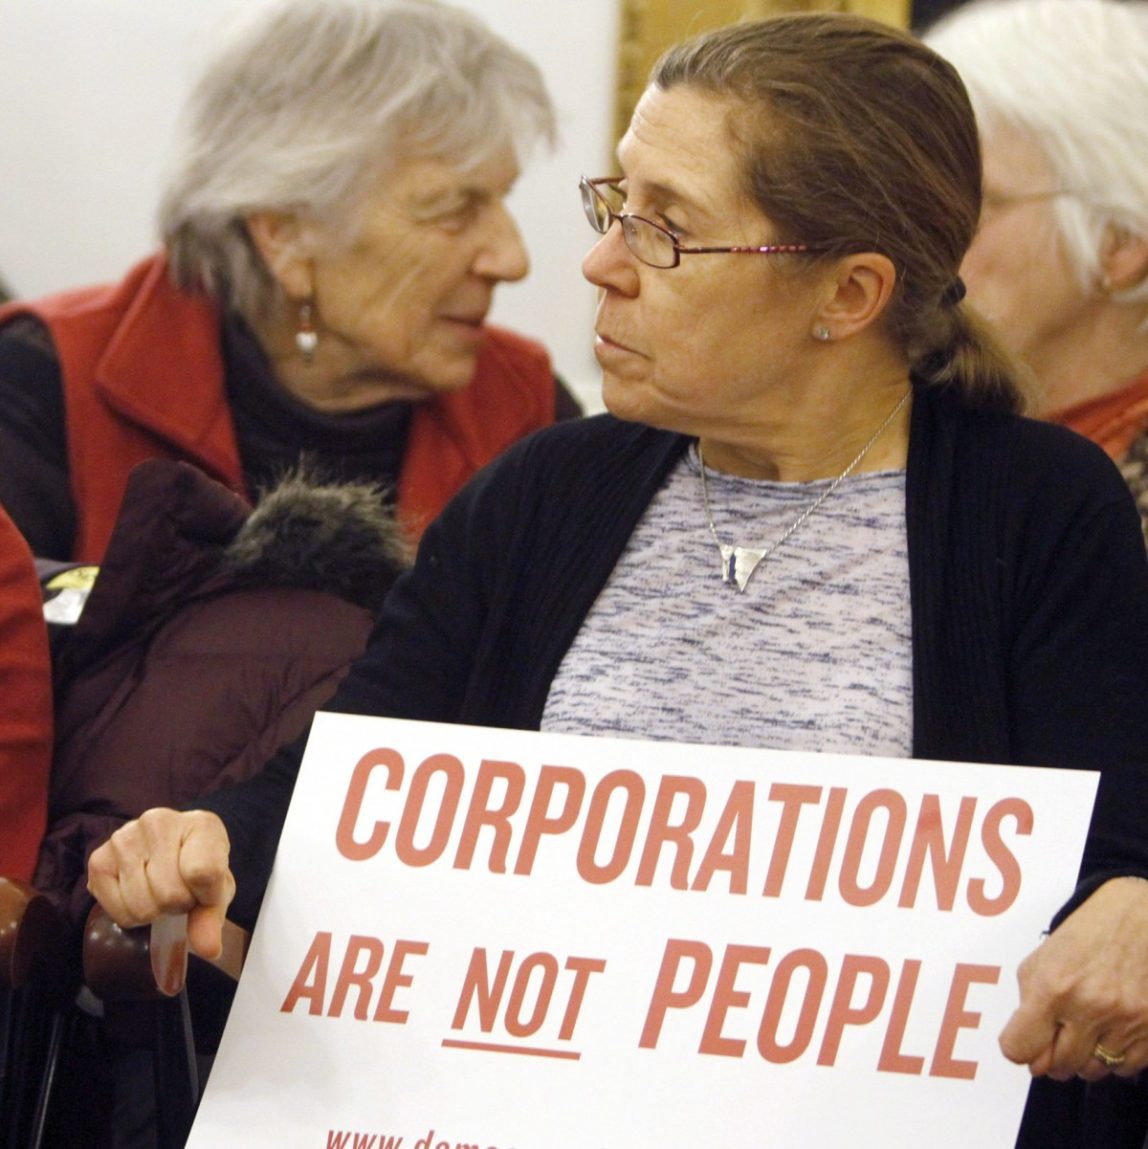 In this Jan. 20, 2012 photo, people hold signs during a gathering on the anniversary of the Citizens United decision in Montpelier, Vt. (AP Photo/Toby Talbot)